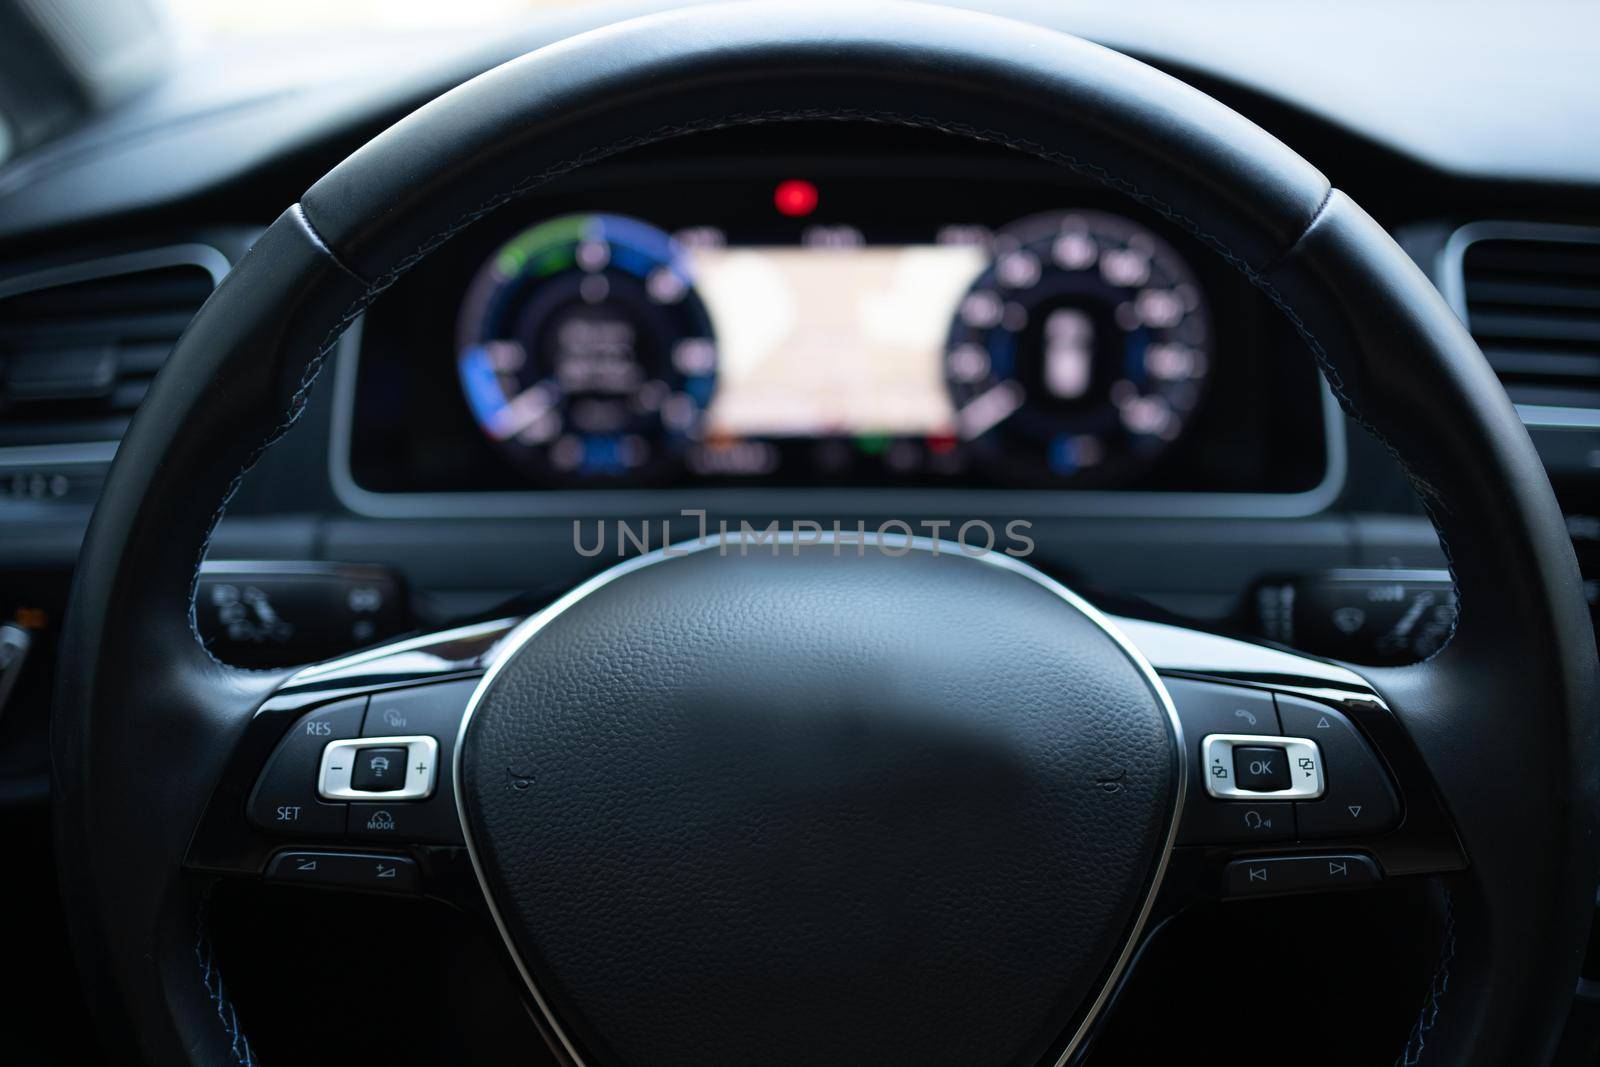 Close up of steering wheel of a new electric vehicle, interior cockpit, electric buttons, digital speedometer. Electric car control devices. Cruise control buttons, speed limitation, car's signal.